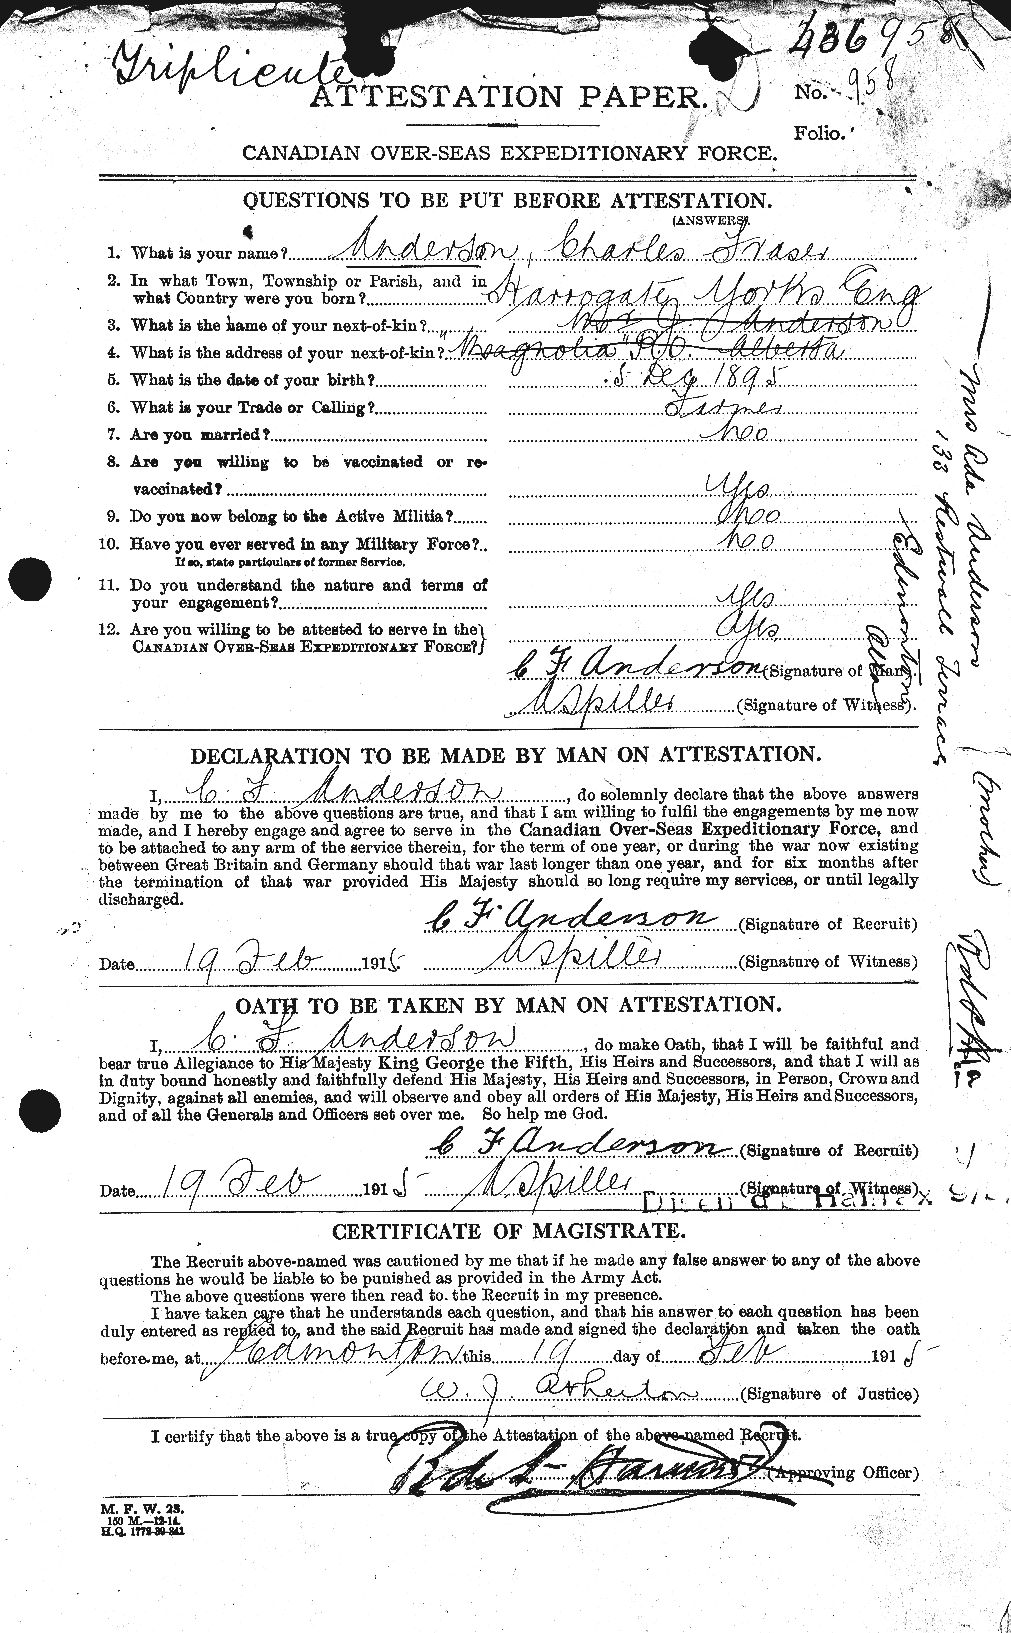 Personnel Records of the First World War - CEF 209240a